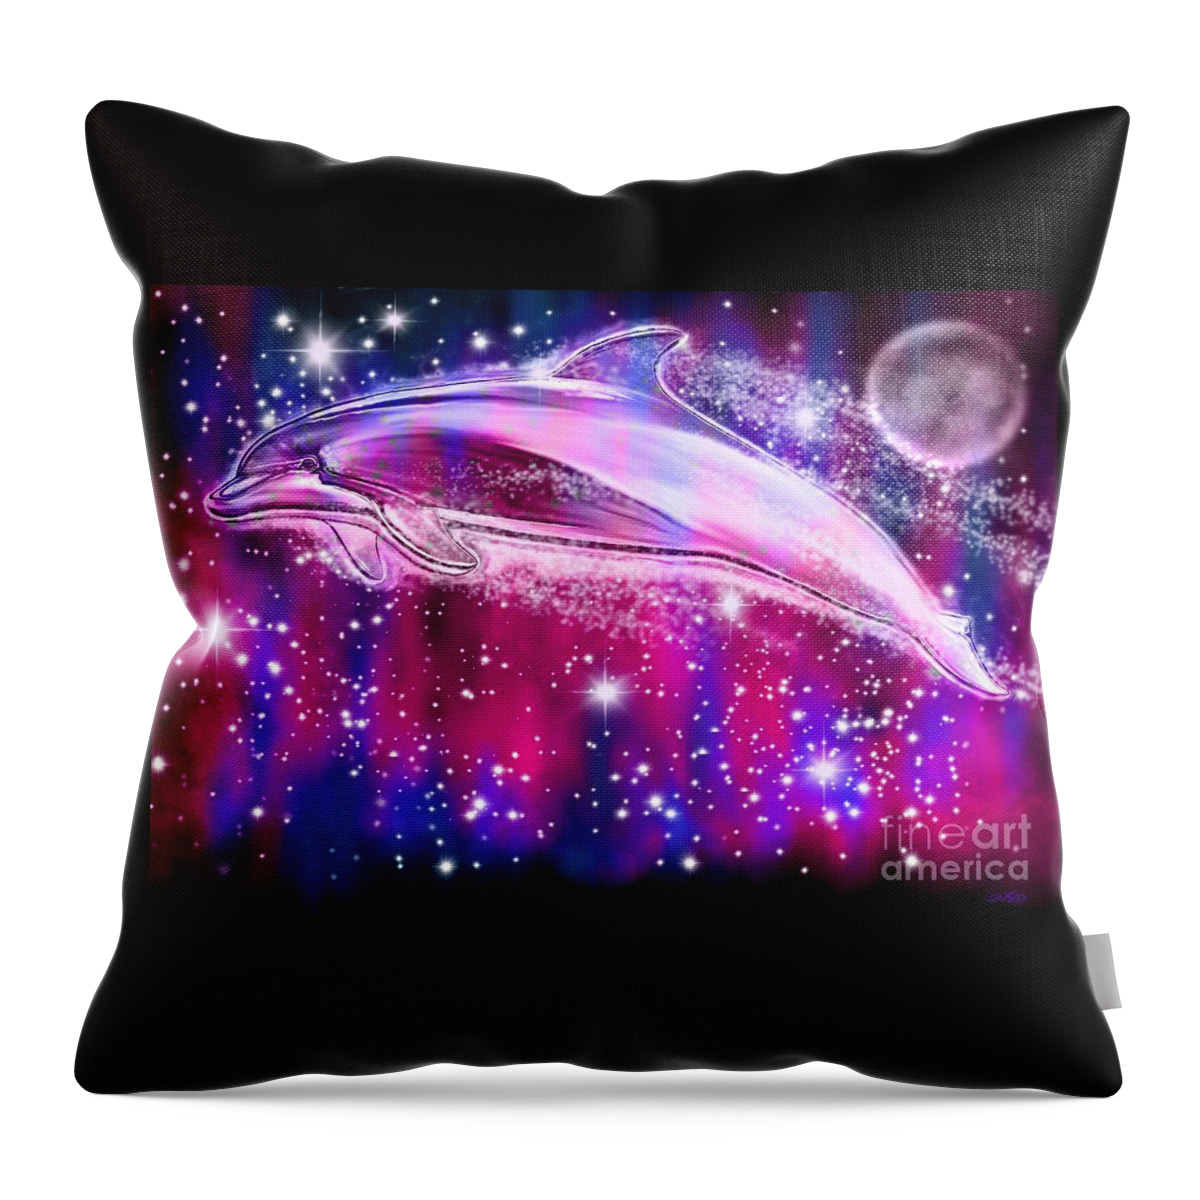 Dolphins Throw Pillow featuring the painting Celestial Dolphin by Nick Gustafson